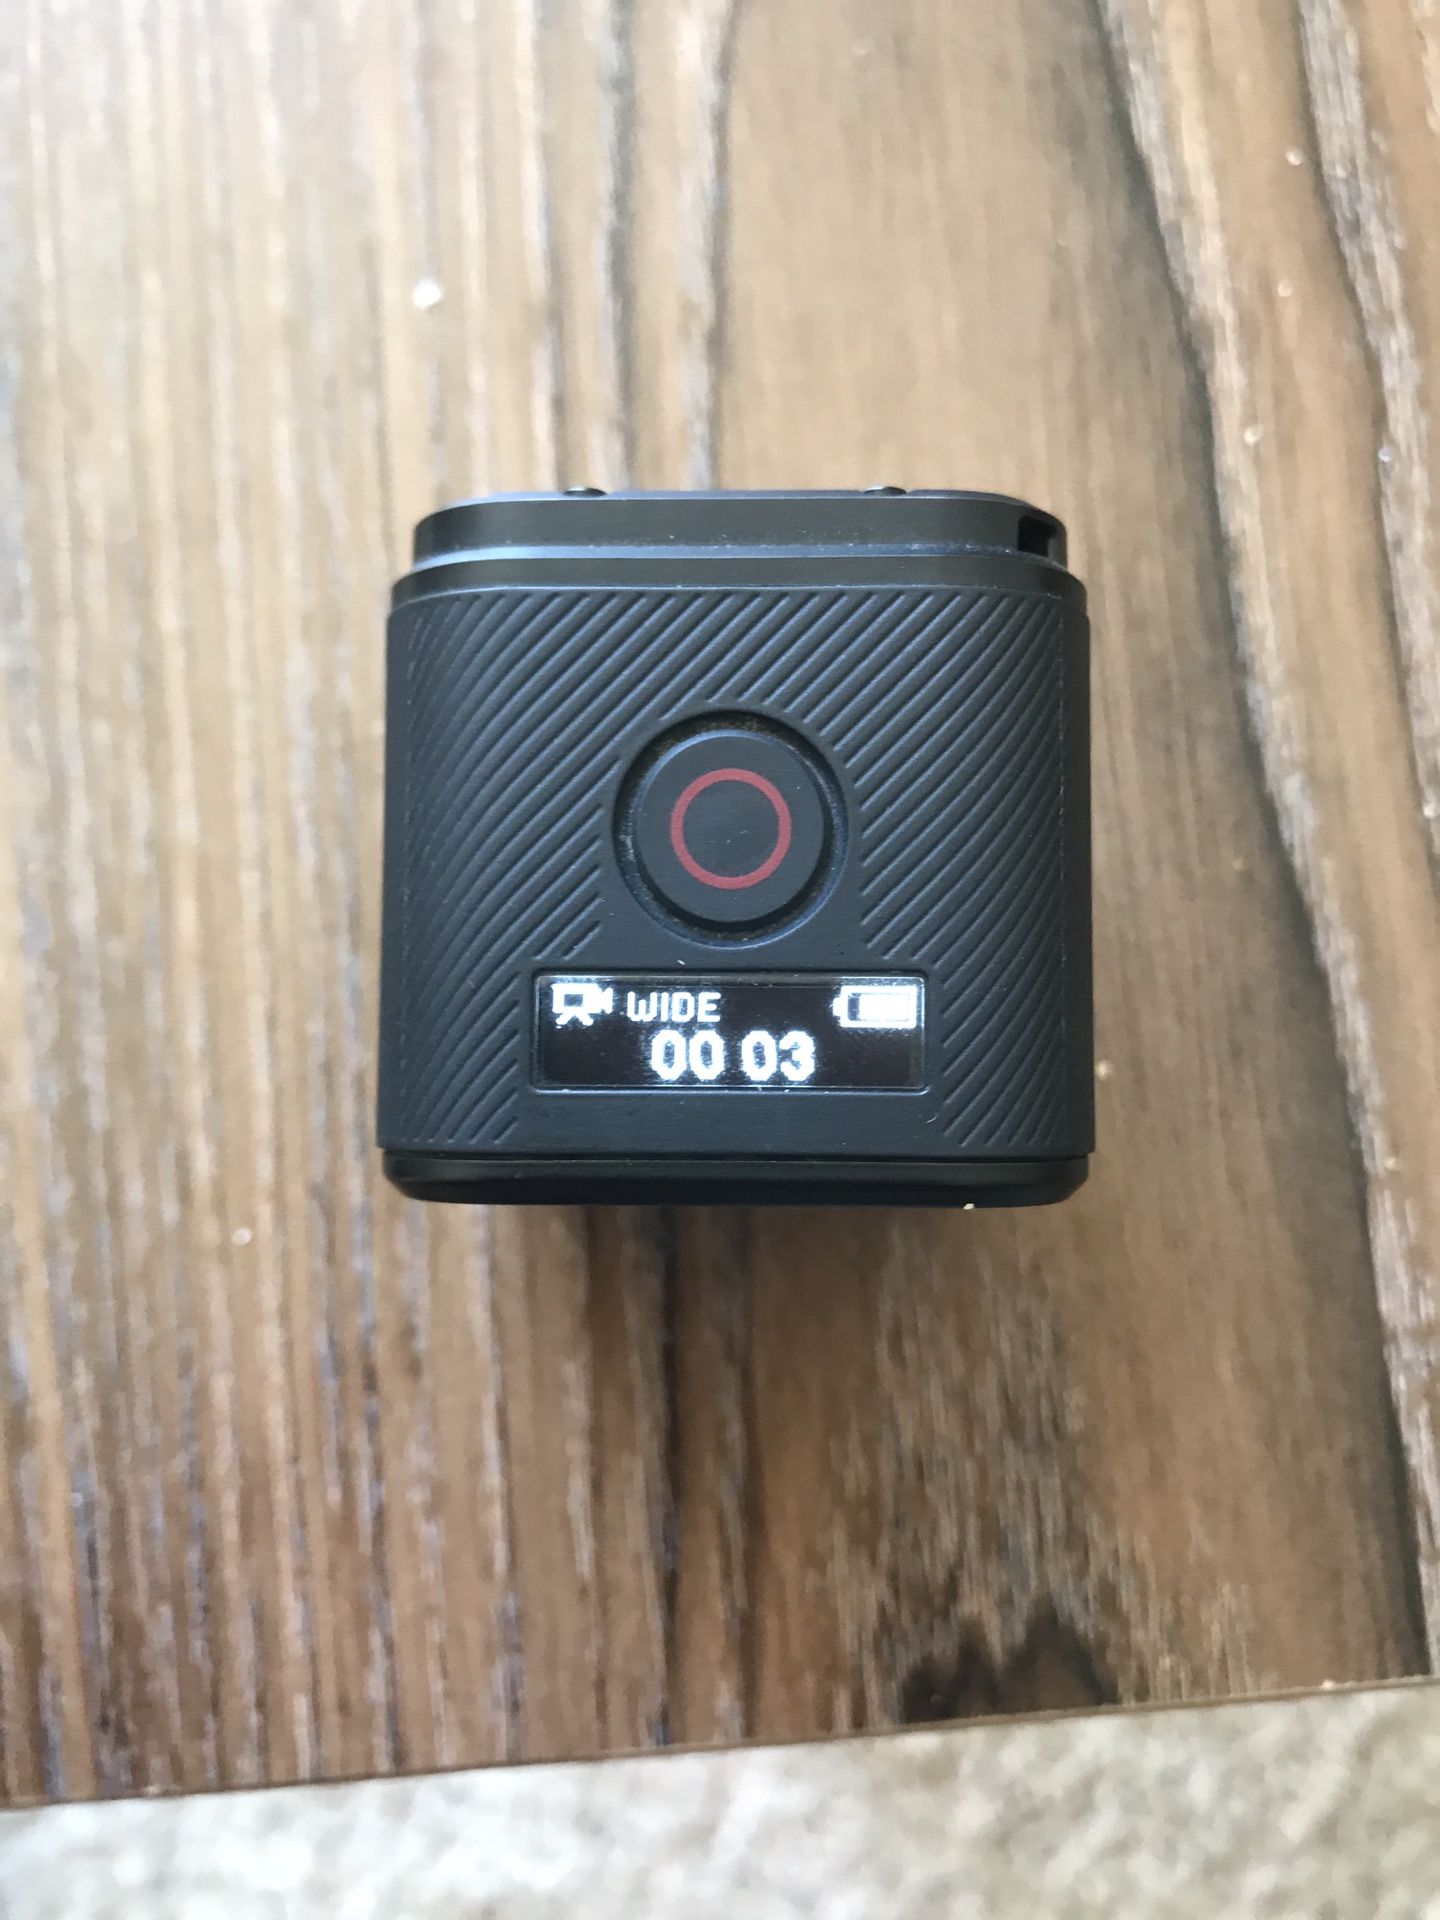 GoPro Hero 4 Session and Accessories